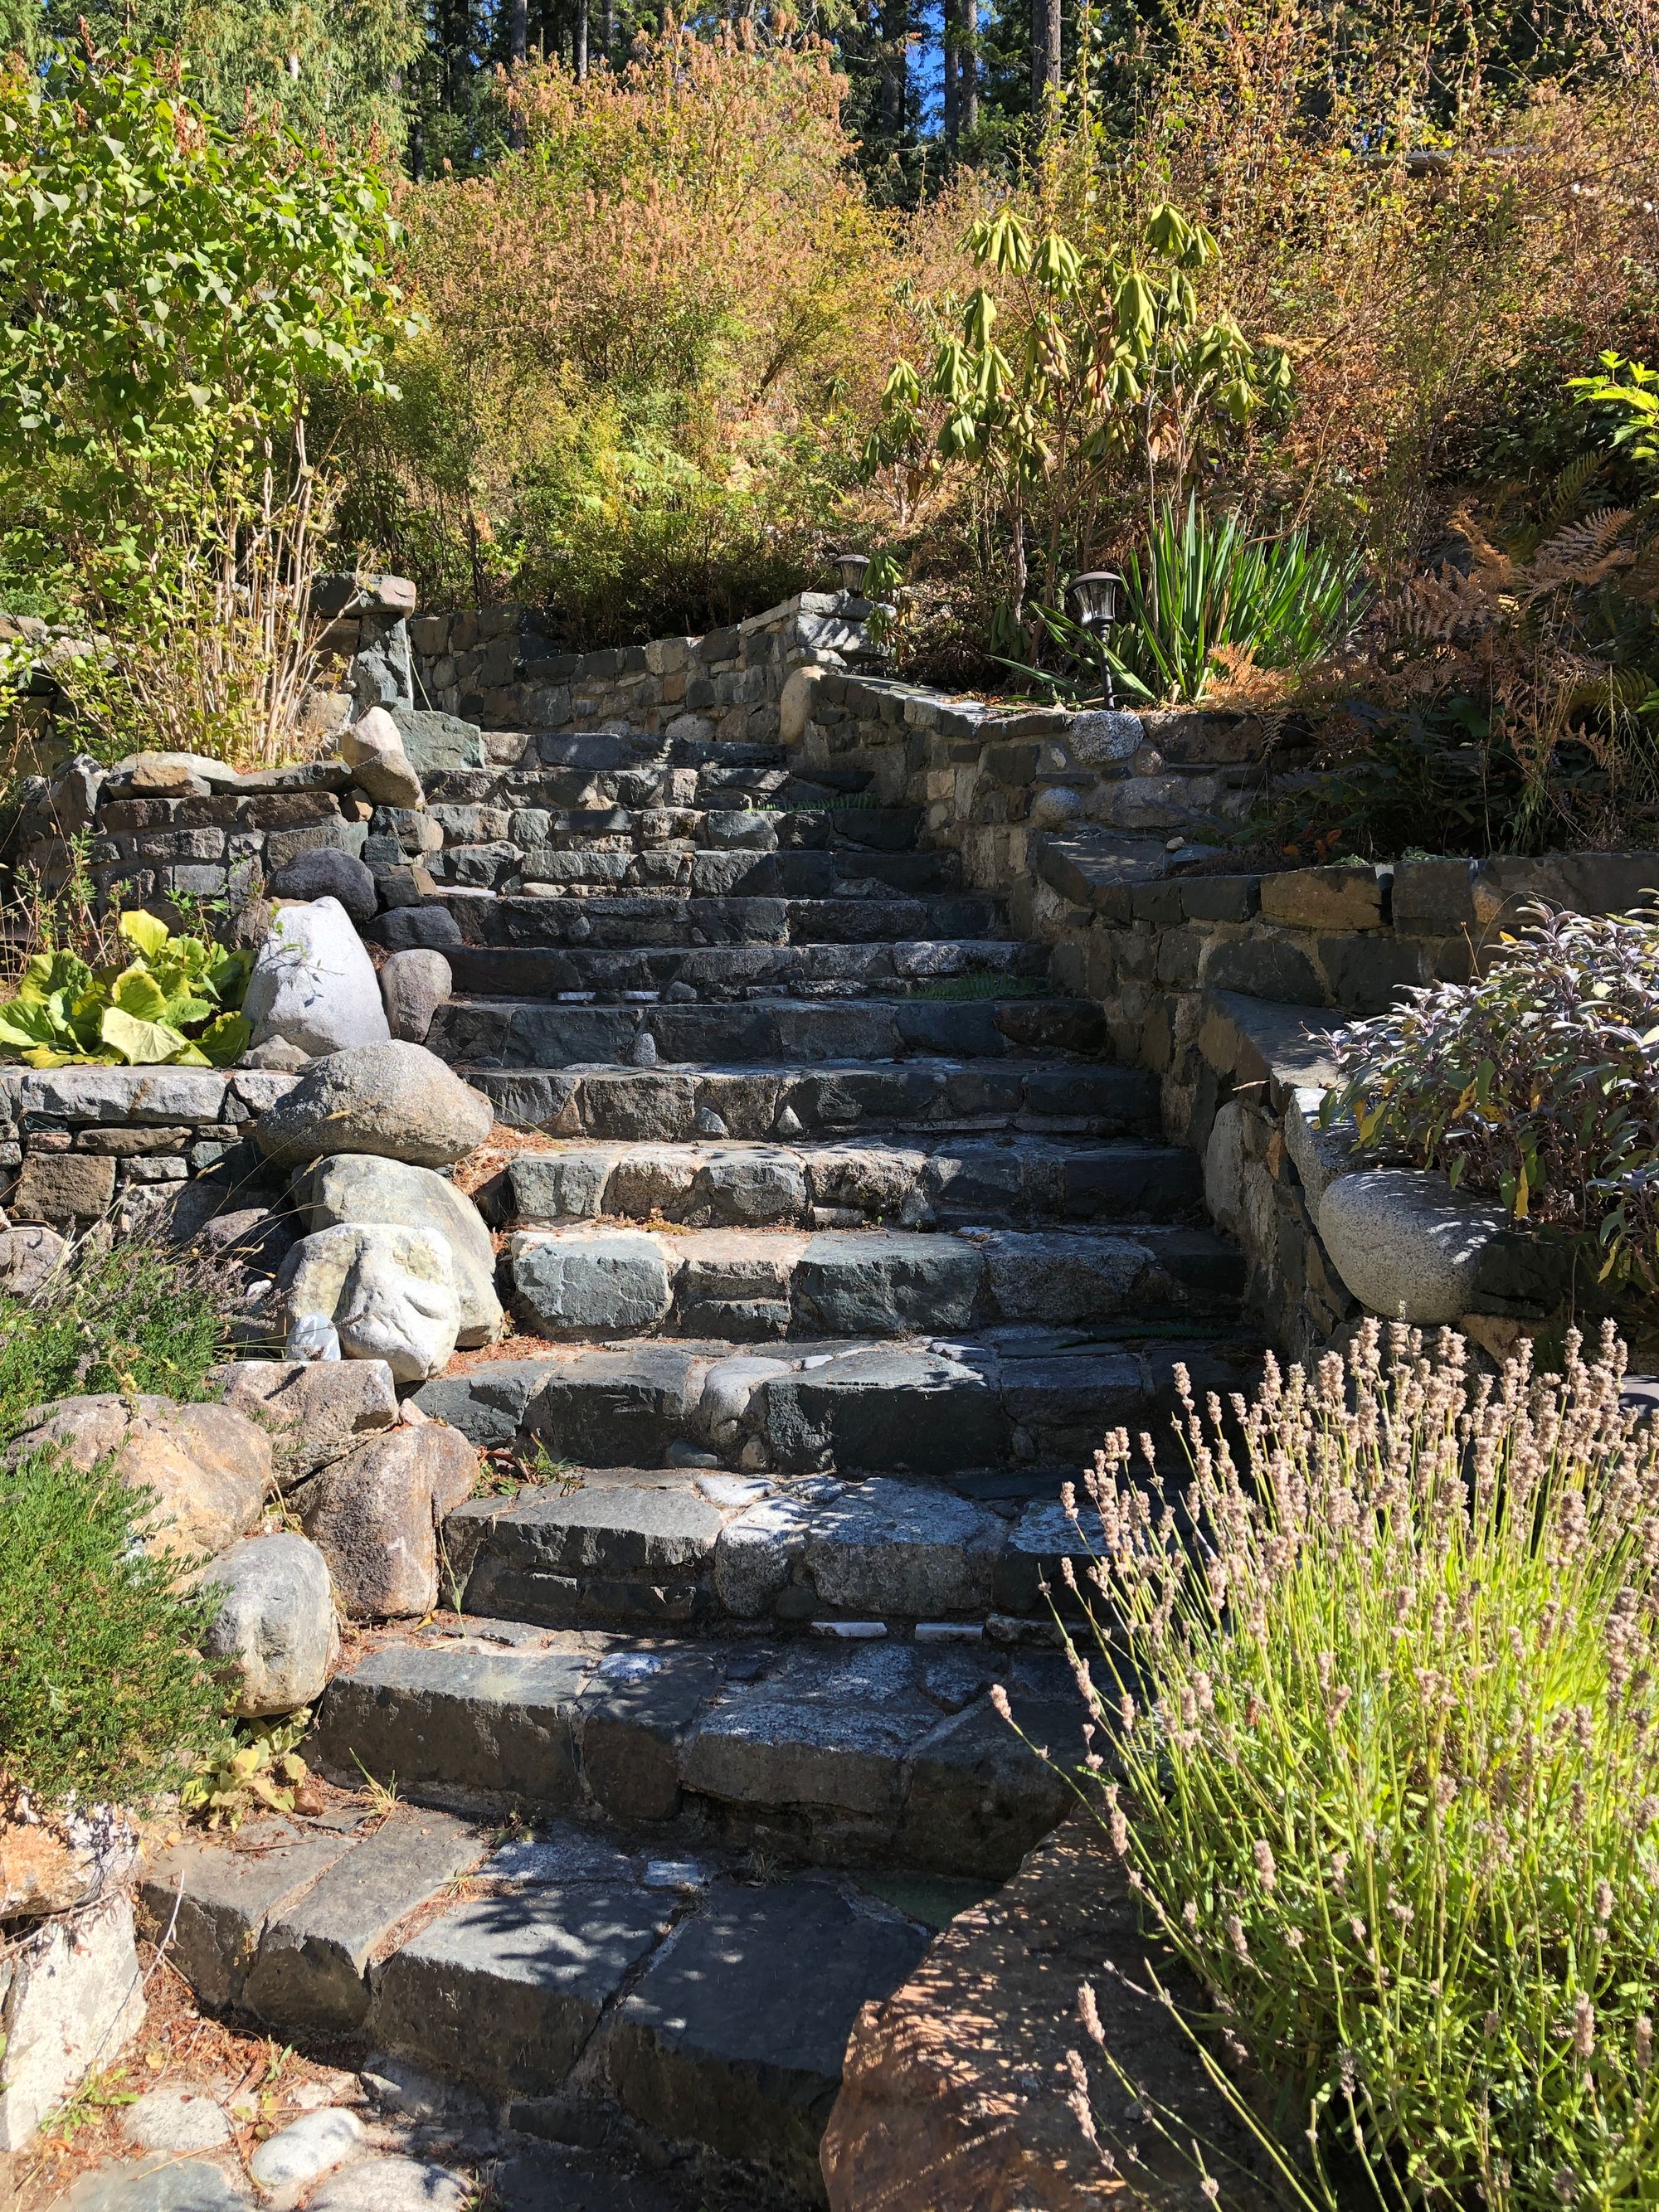 A curving stone staircase in bright sunlight, surrounded by terraced spots of greenery.